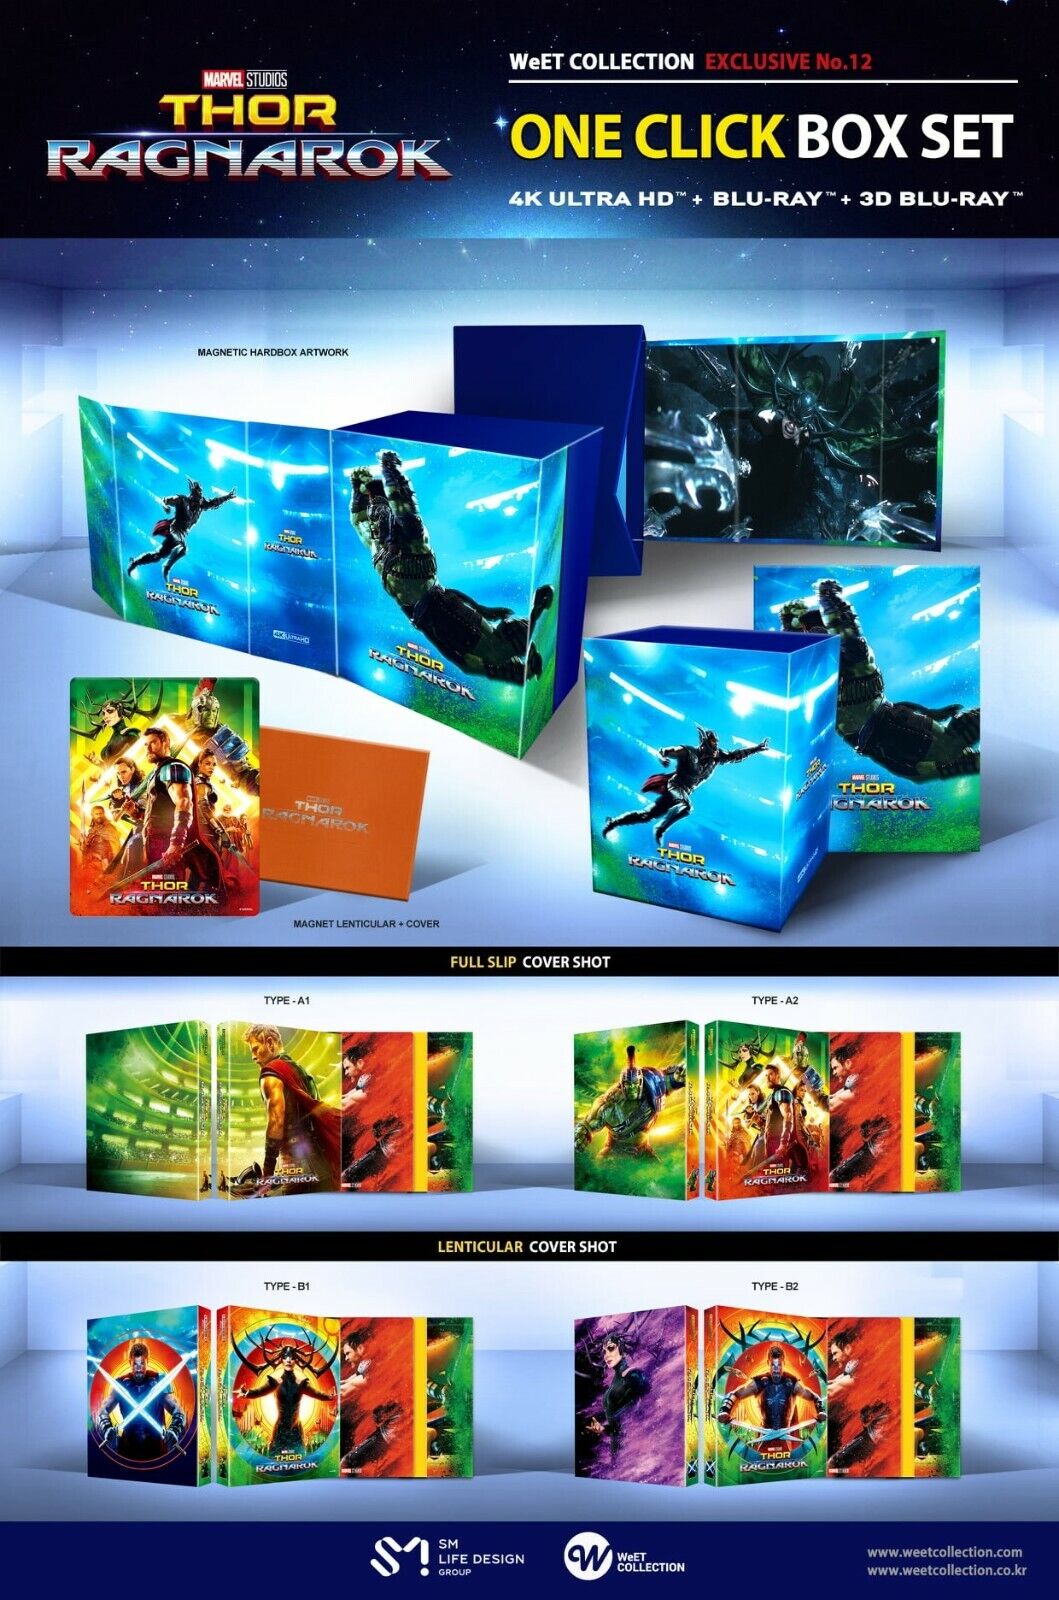 Thor: Ragnarok 4K+3D+2D Blu-ray Steelbook WeET Collection Exclusive #12 One Click Box Set